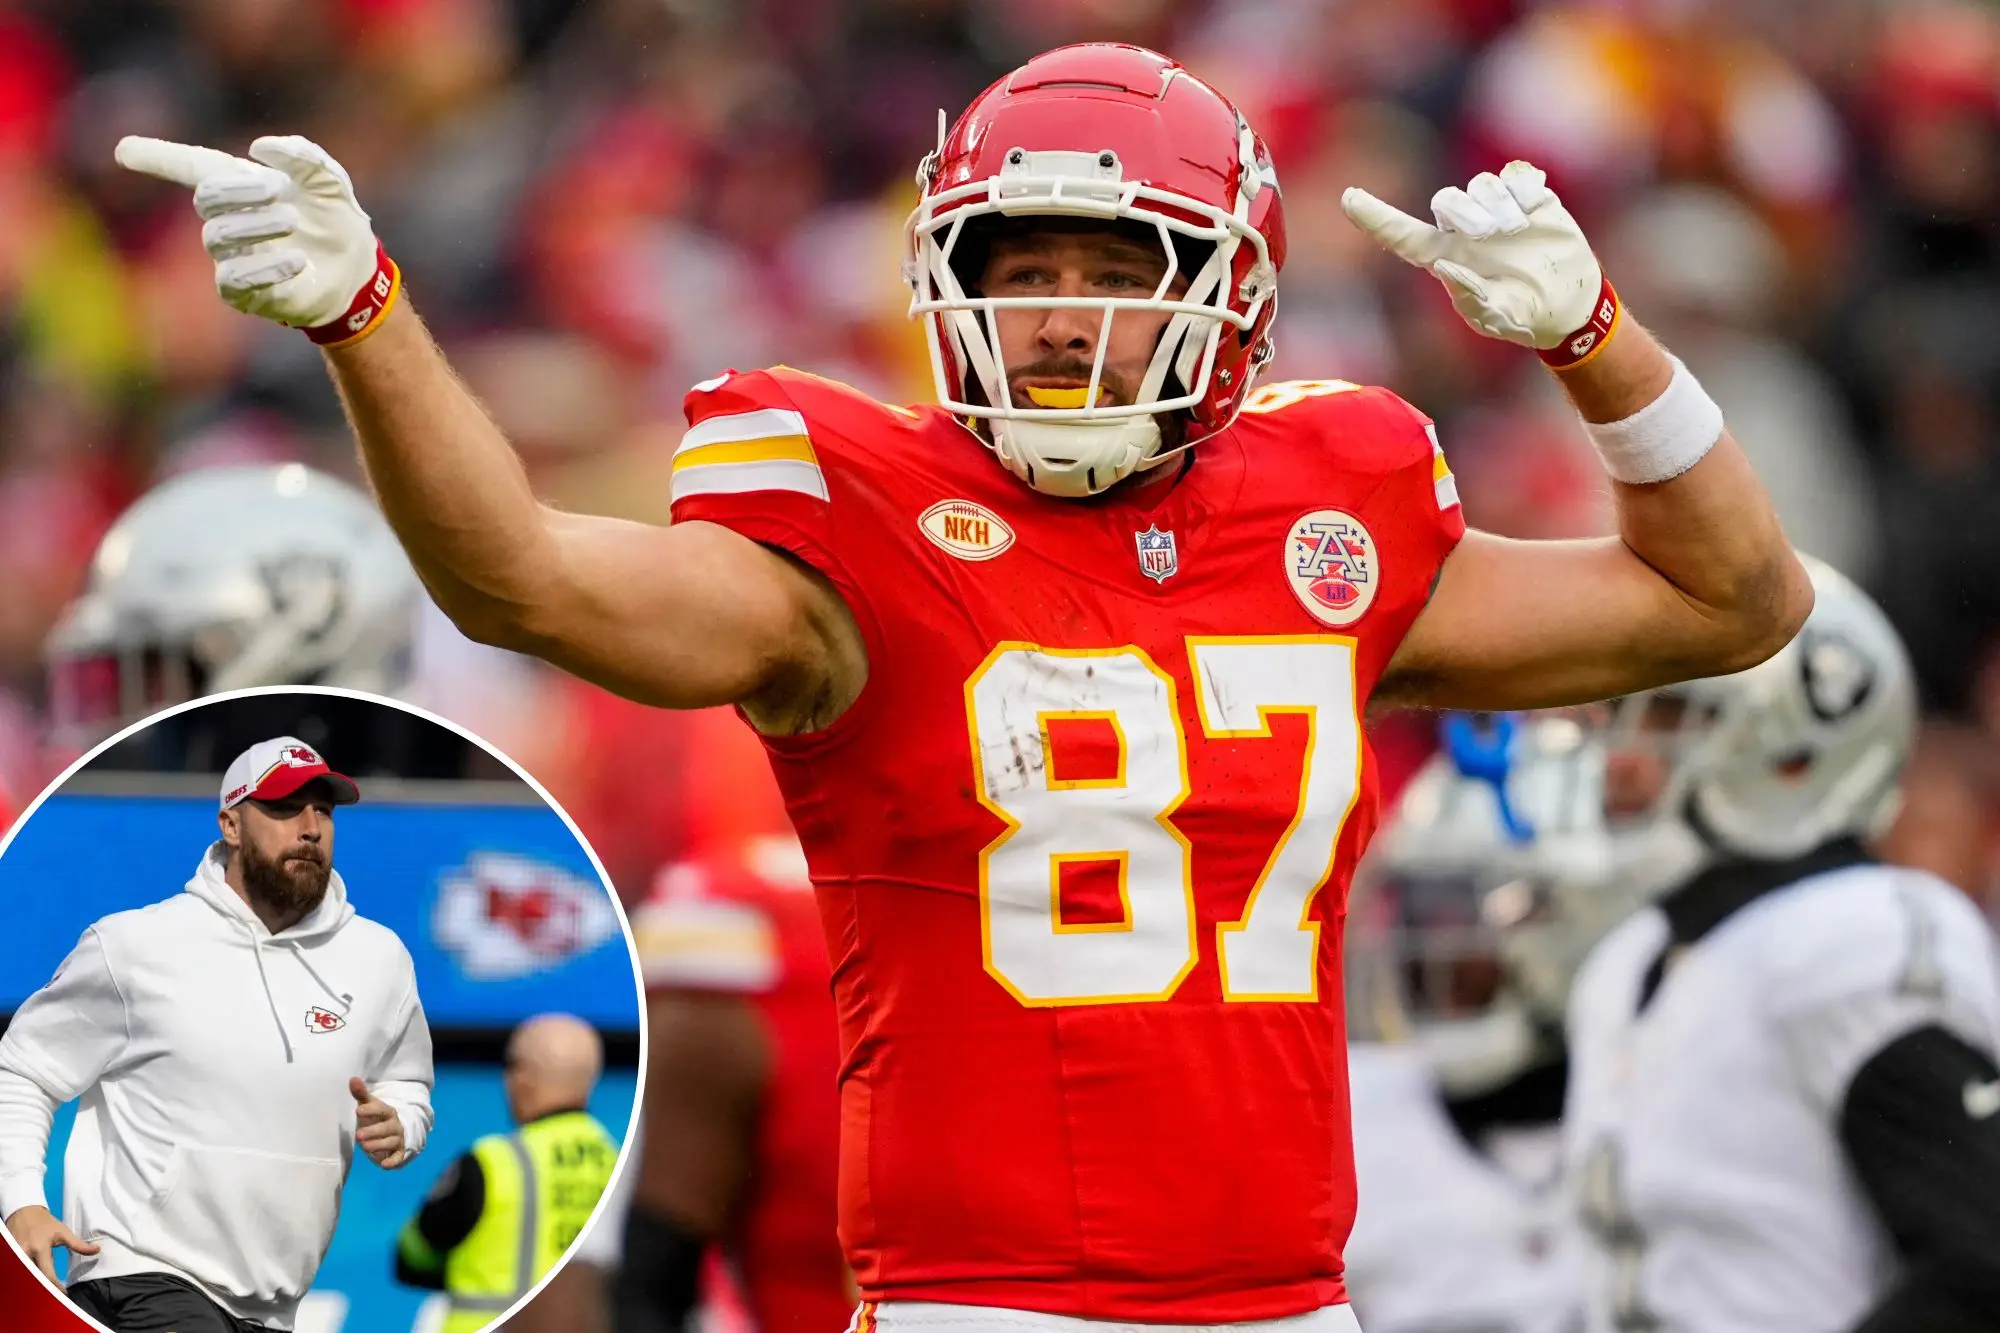 Breaking News: At 34, Chiefs TE Travis Kelce joyfully announces his retirement, expressing his anticipation for fatherhood.